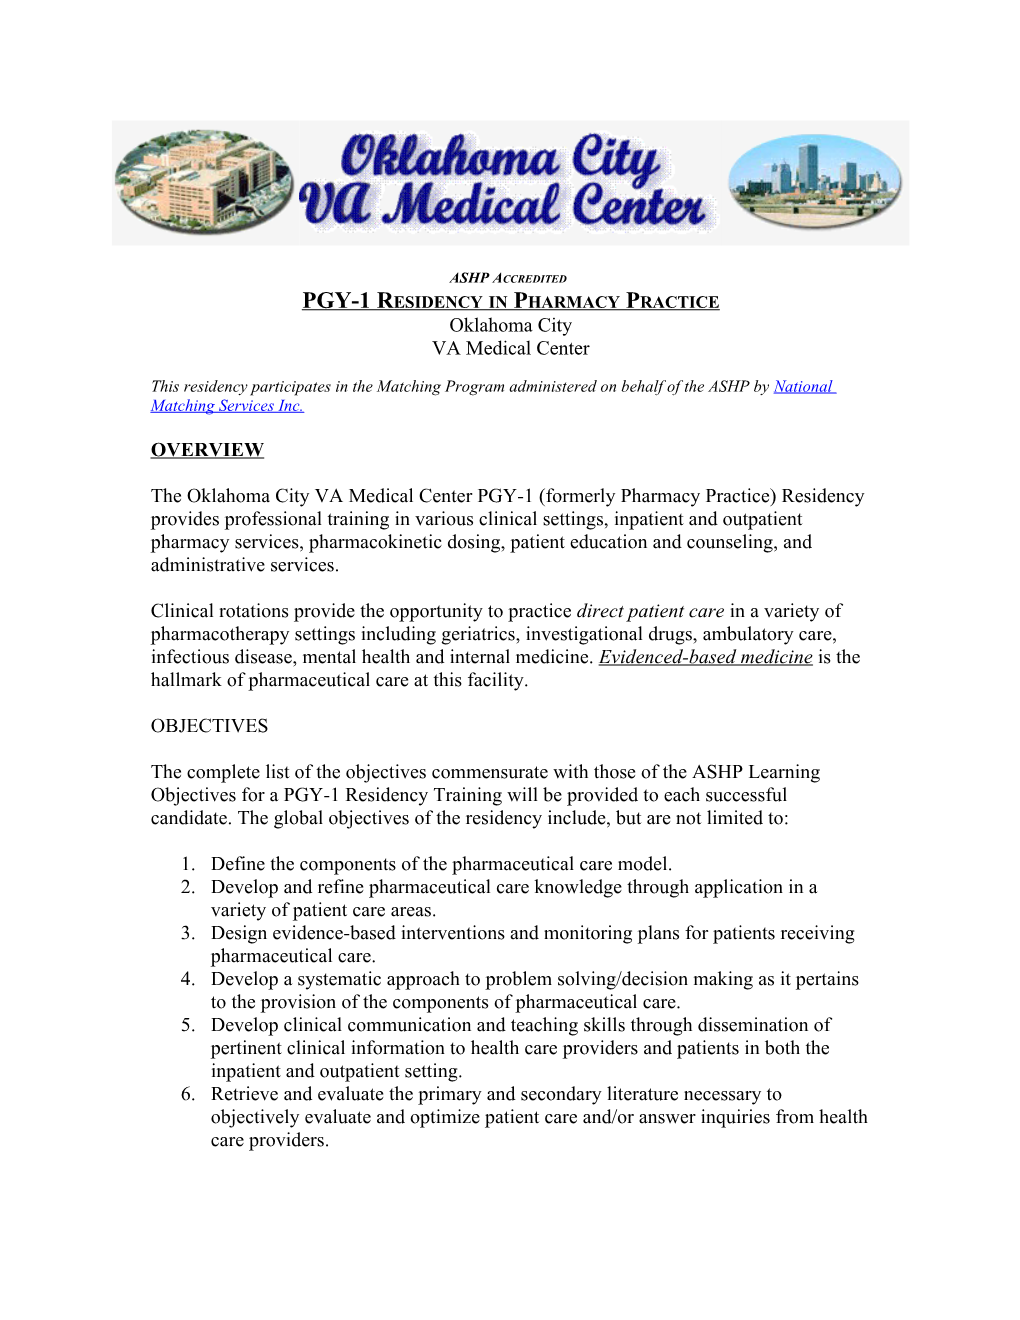 PGY-1 Residency Inpharmacy Practice